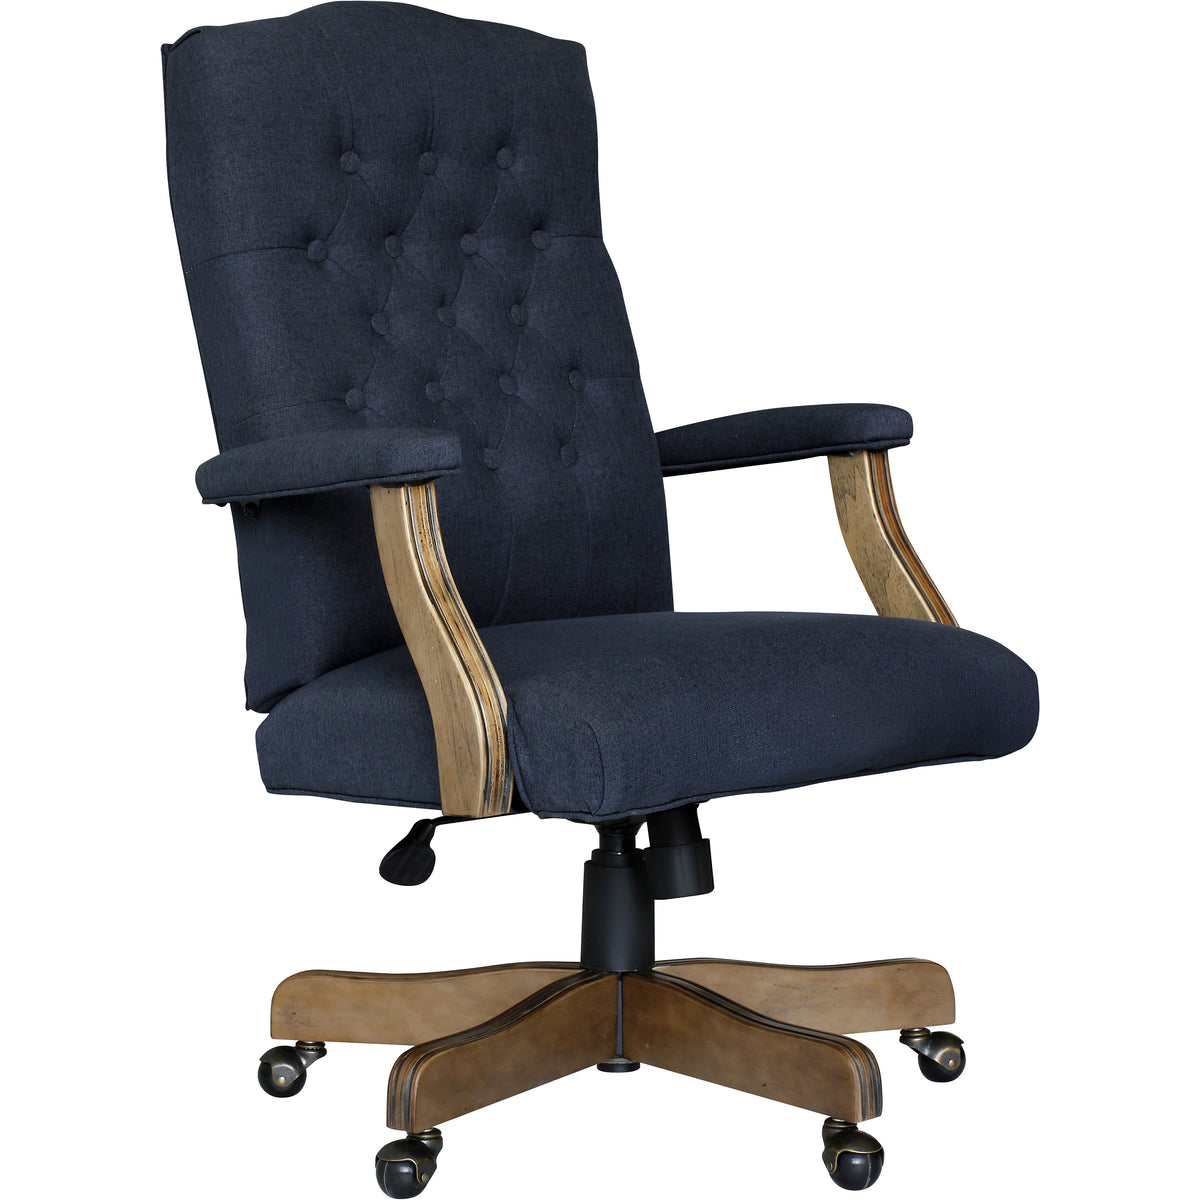 Executive Navy Commercial Grade Linen Chair With Driftwood Finish Frame, B905DW-NV